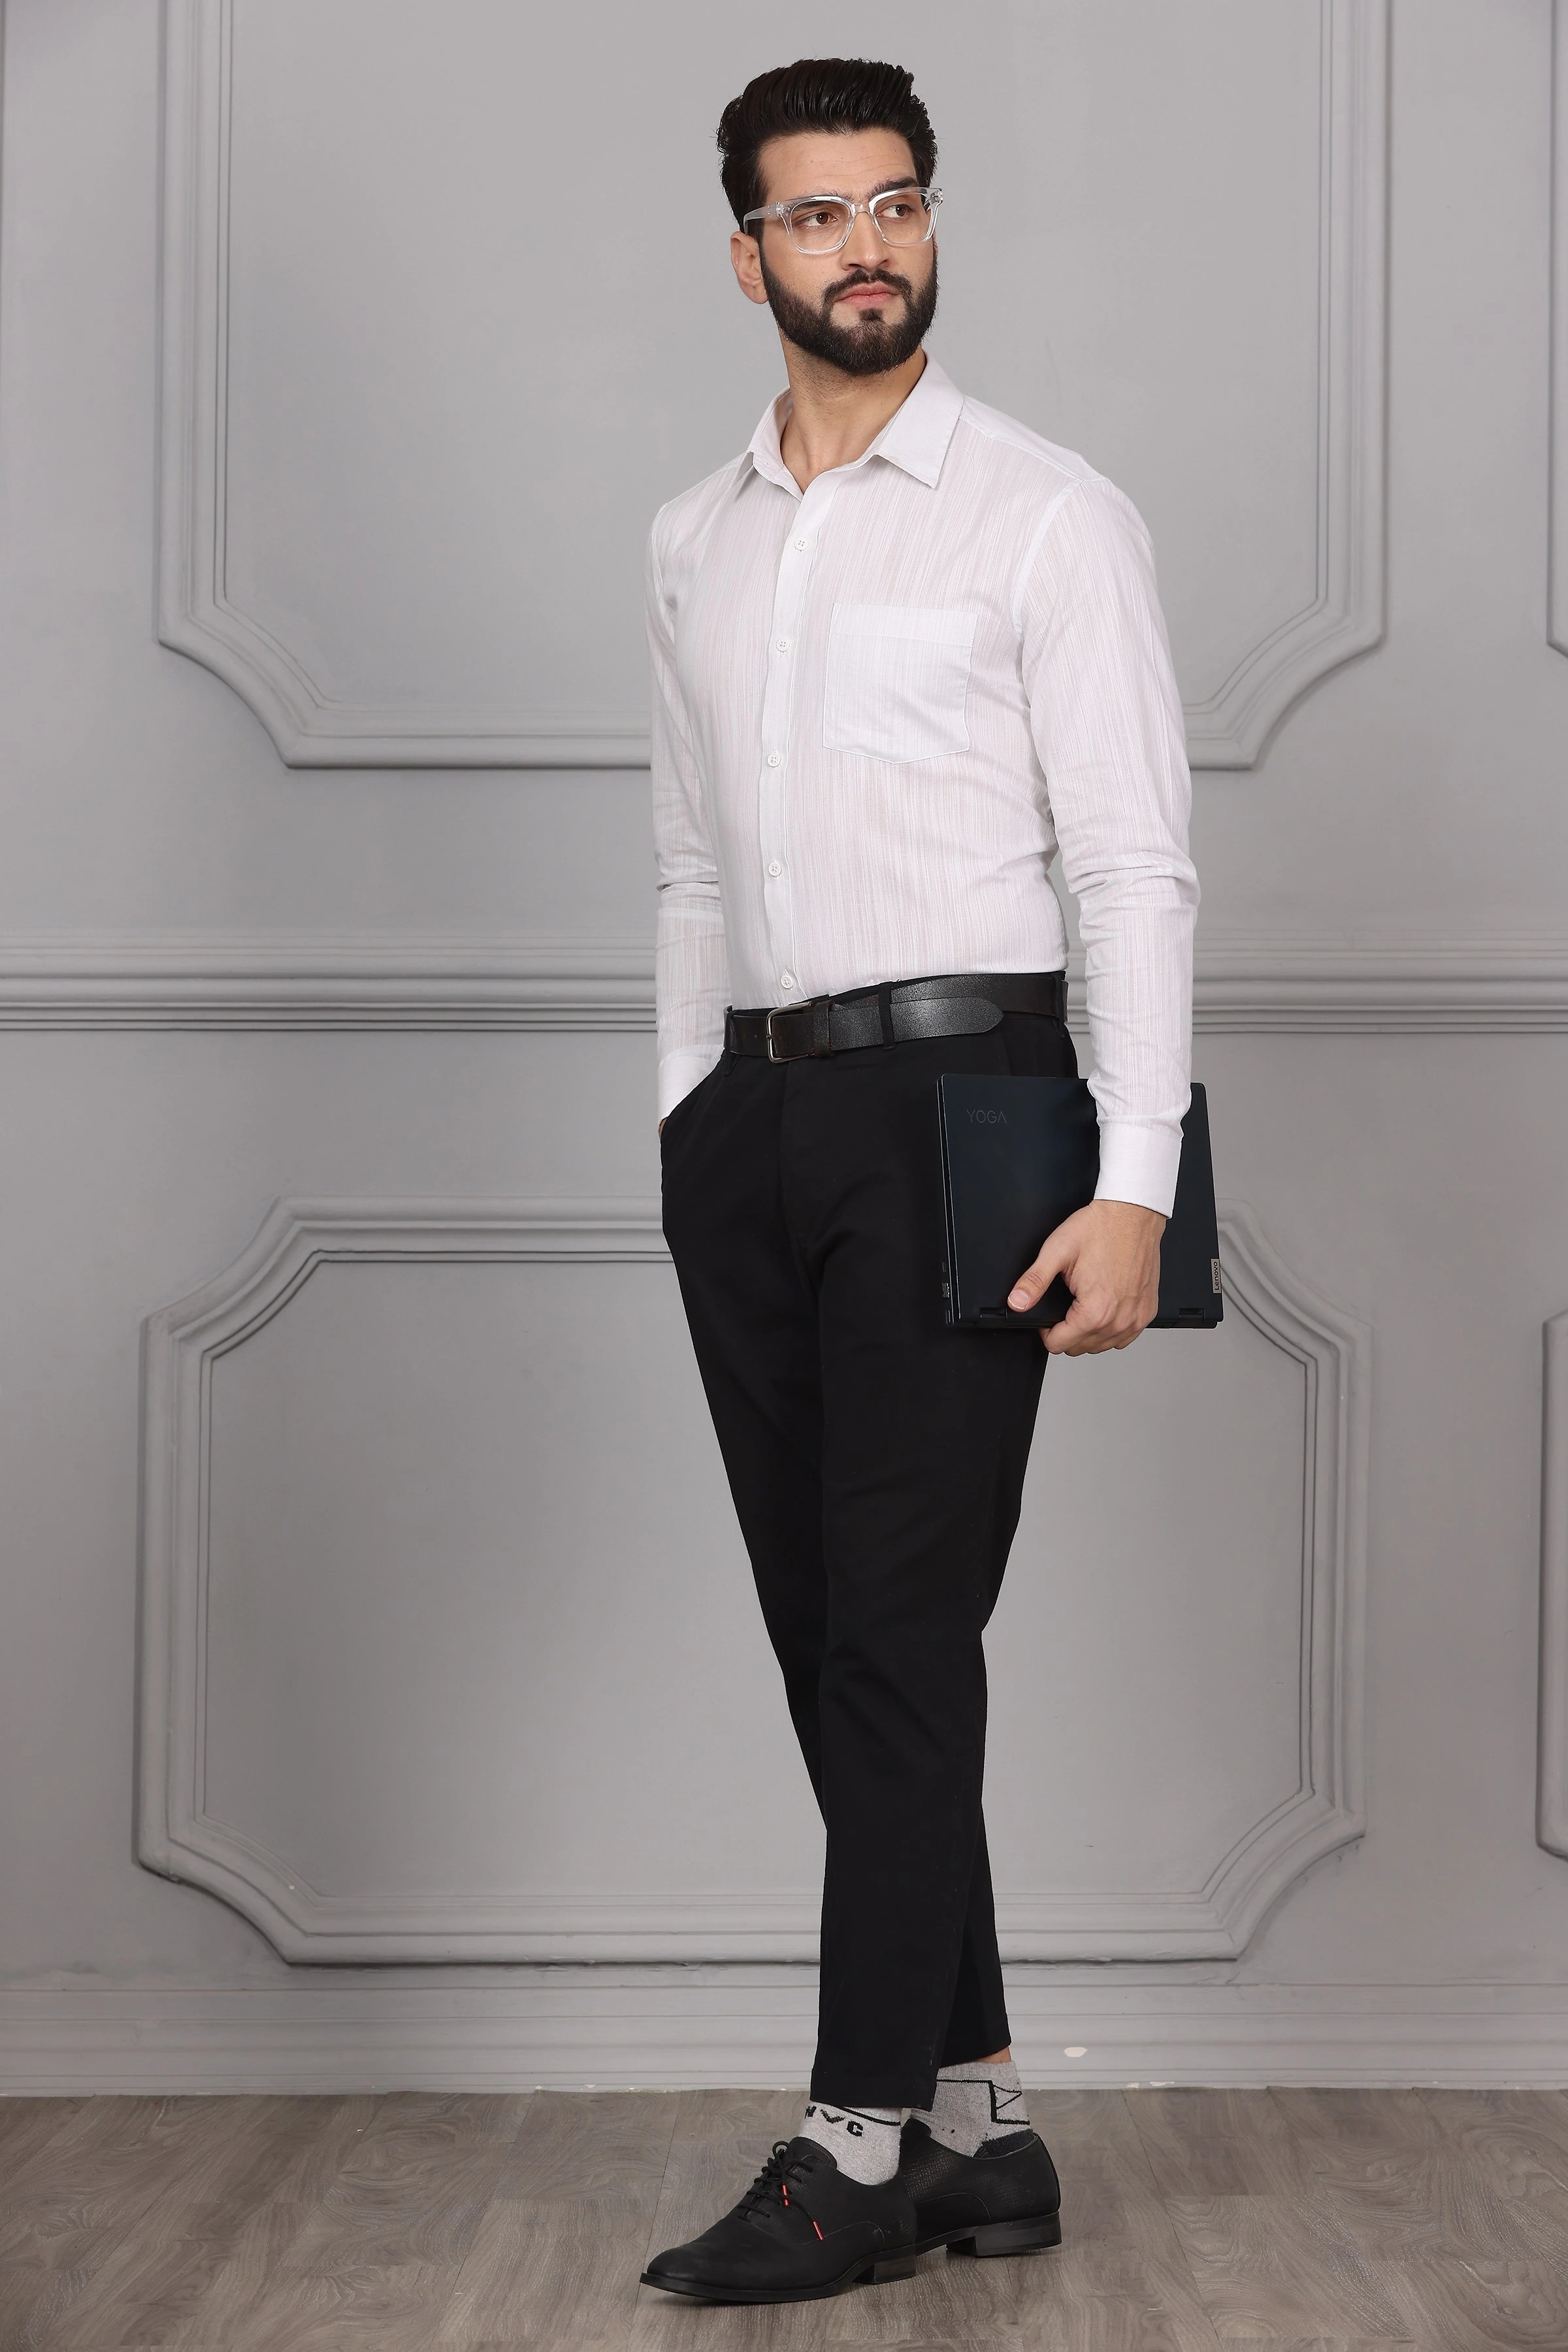 Textured White Grey Business Formal Cotton Shirt-S-4